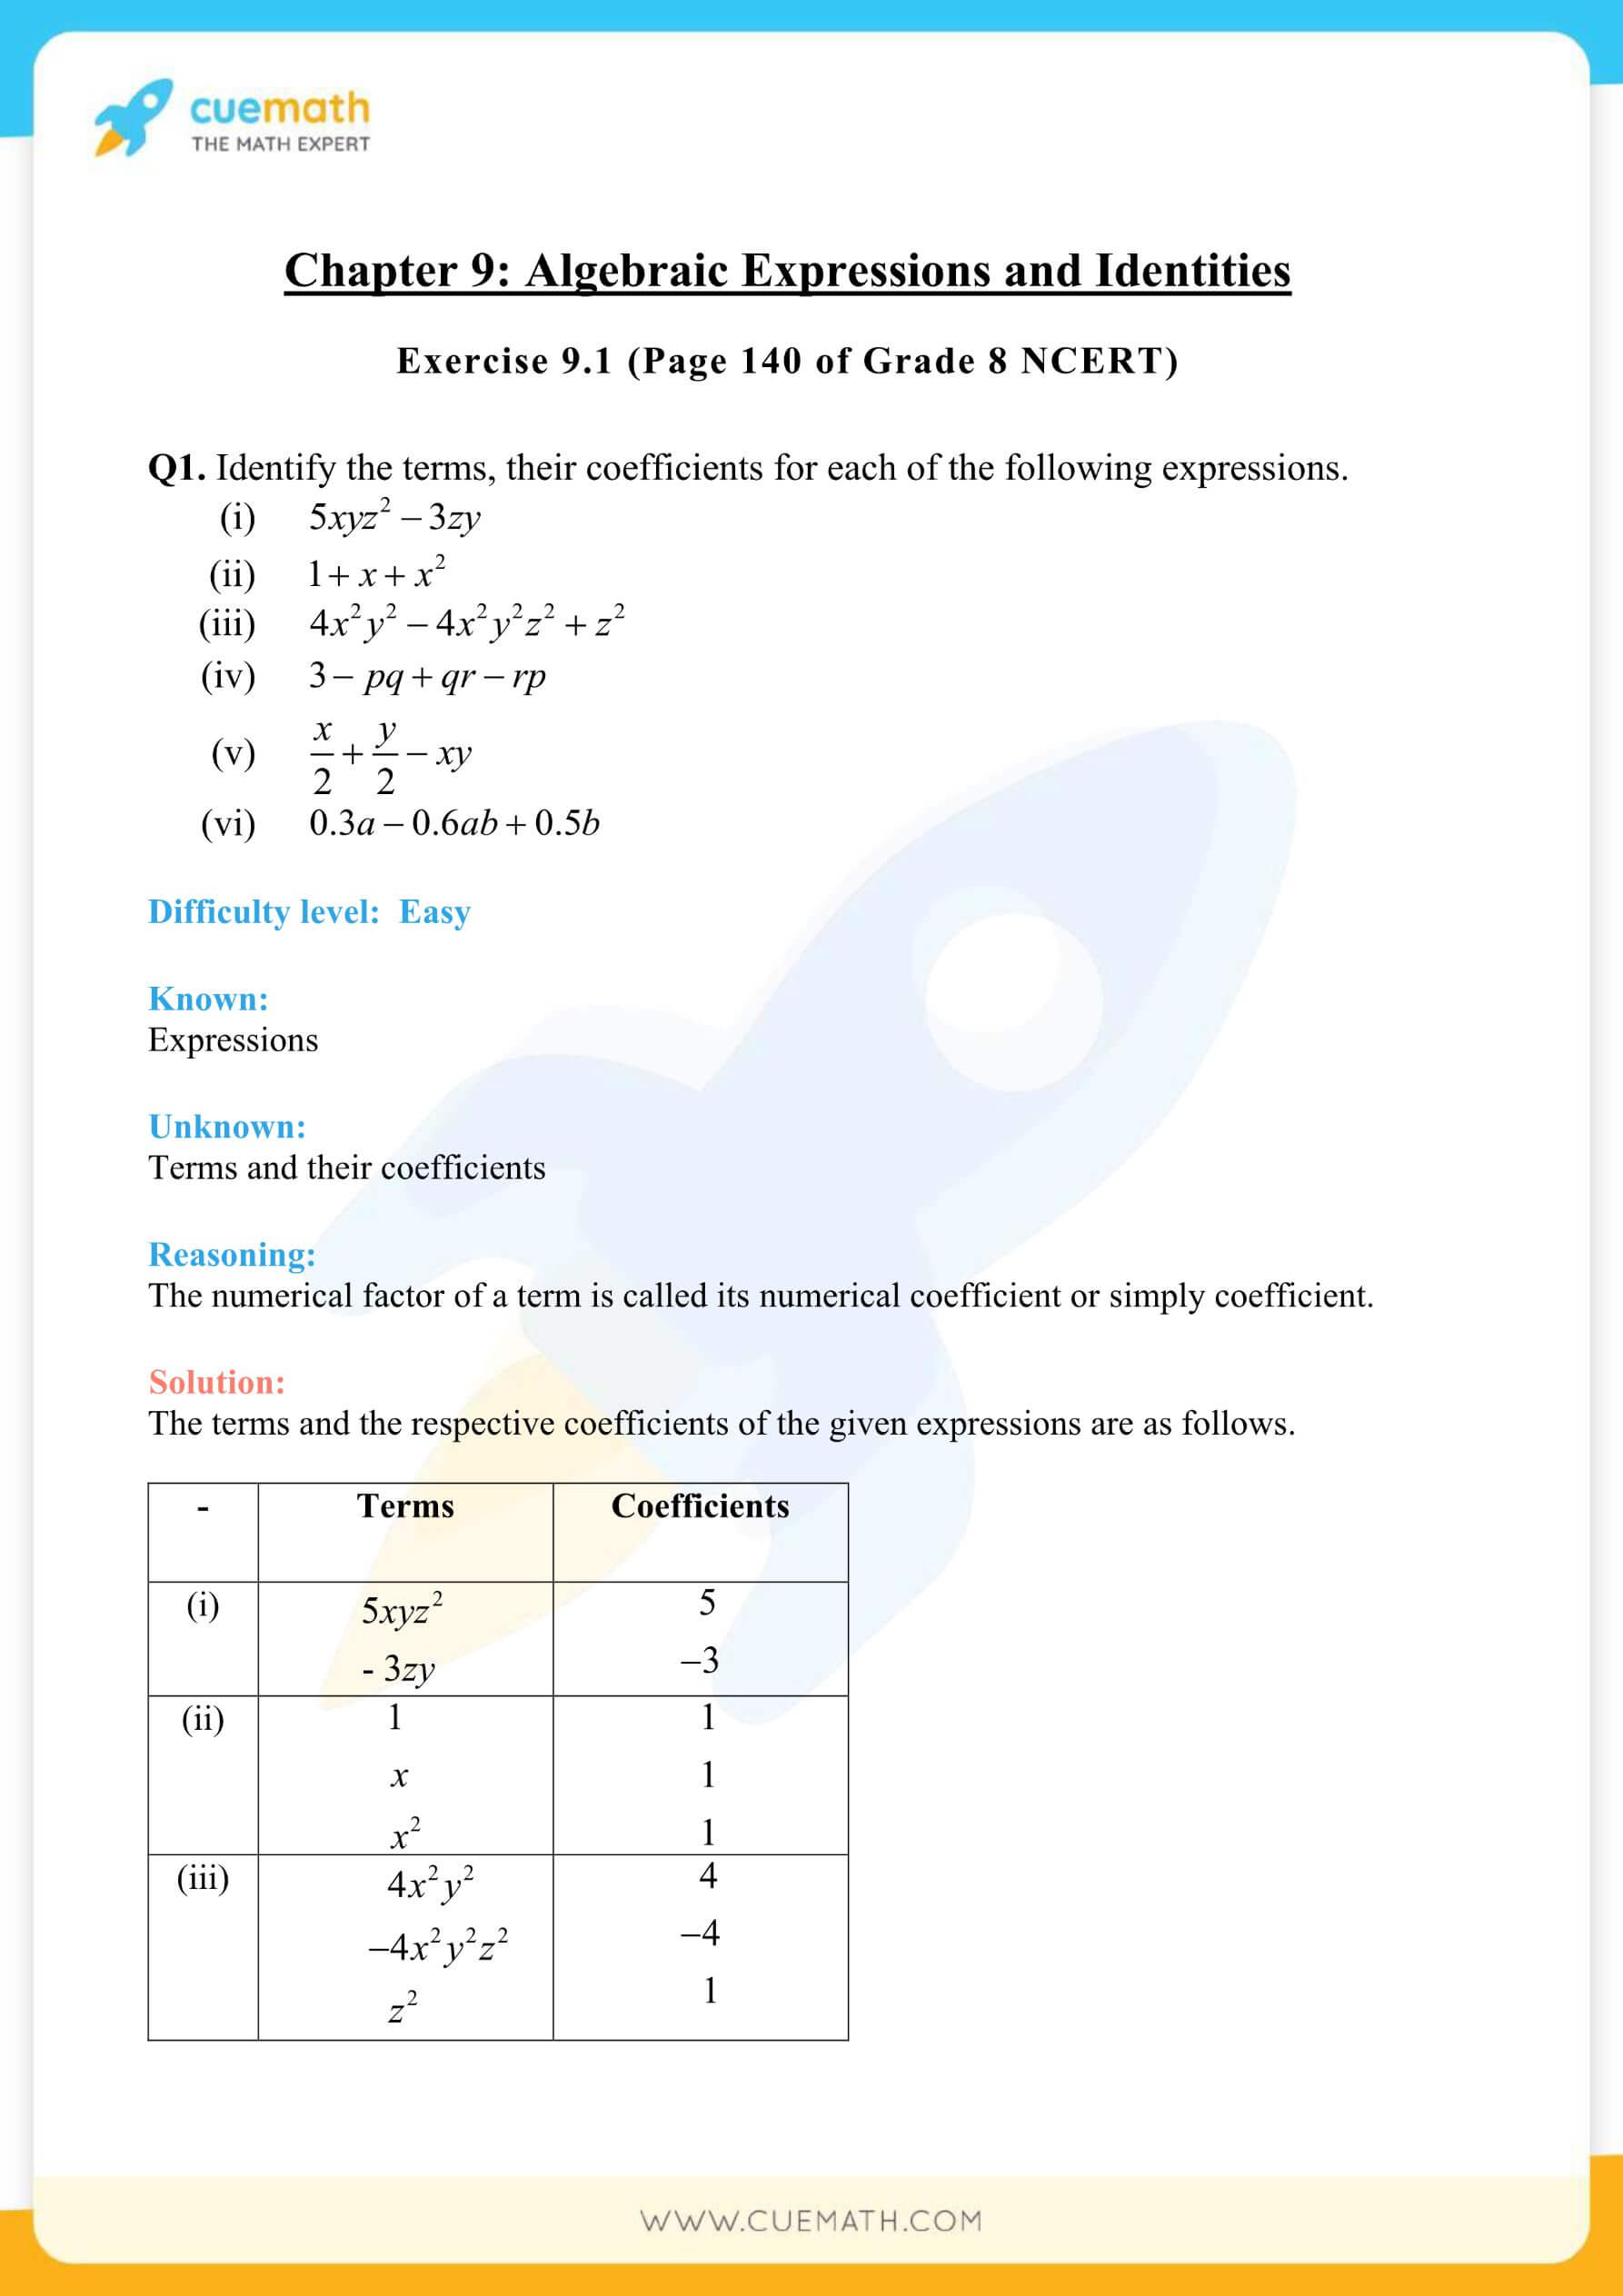 NCERT Solutions Class 8 Math Chapter 9 Exercise 9.1 1